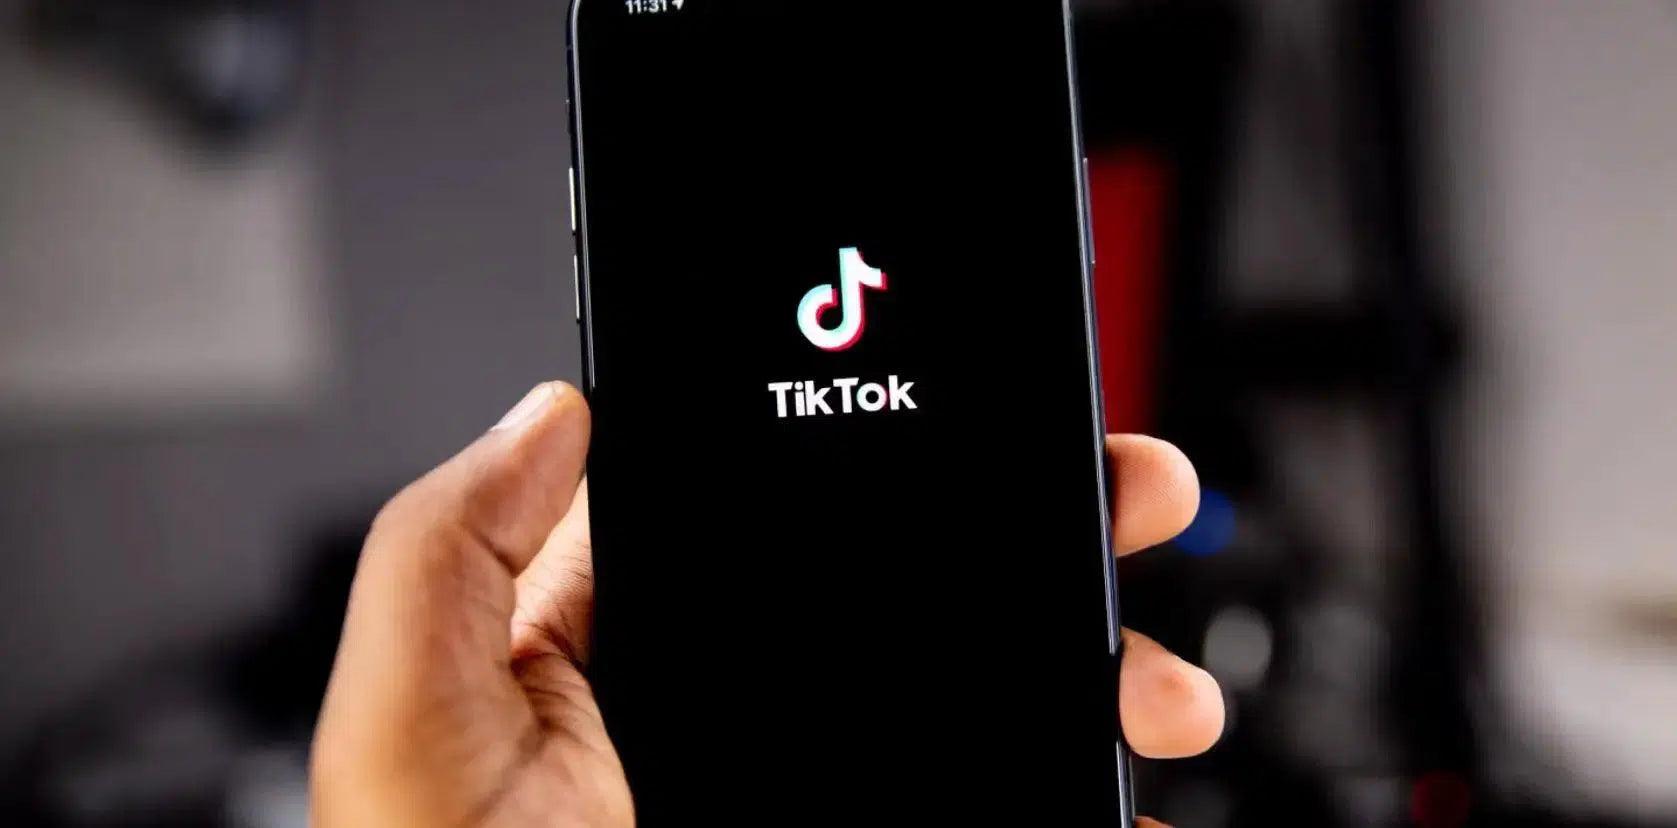 Why Am I Not Getting Any TikTok Live Views?